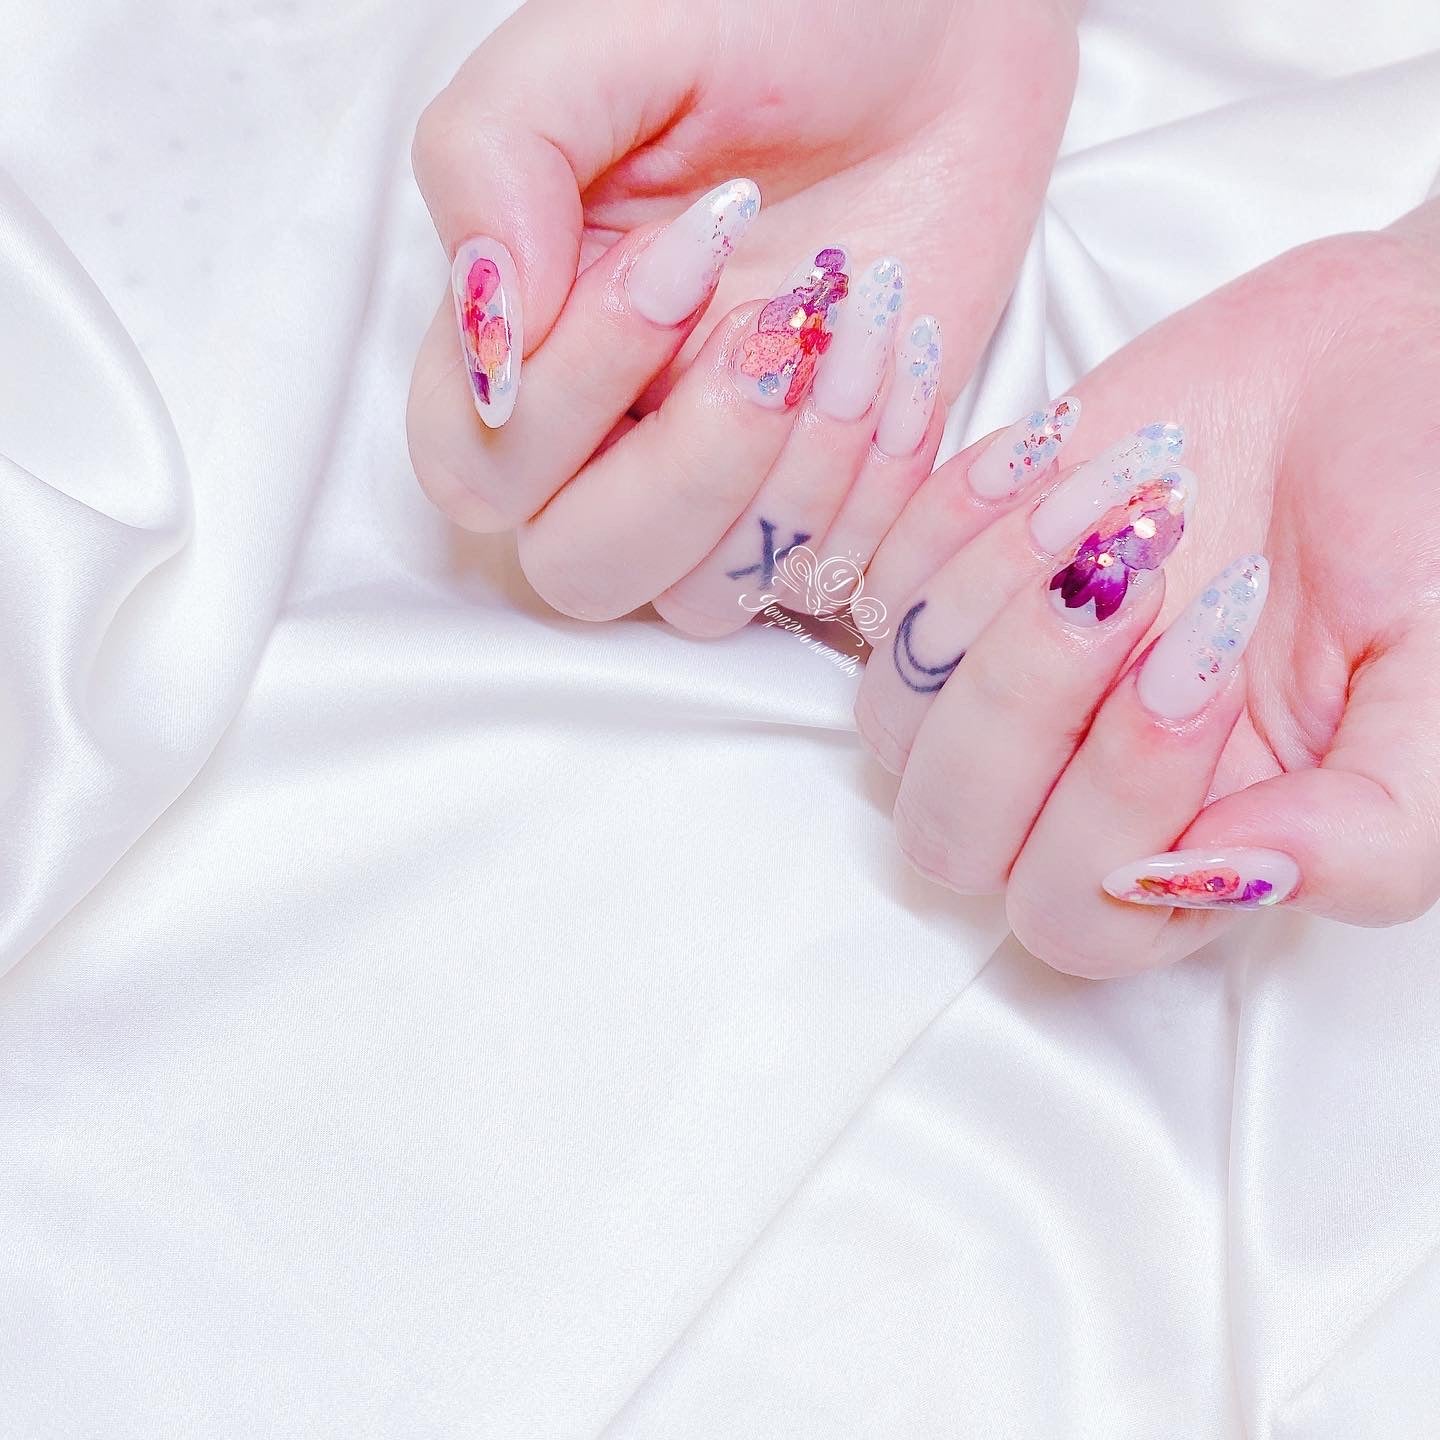 Japanese gel design with dry flowers